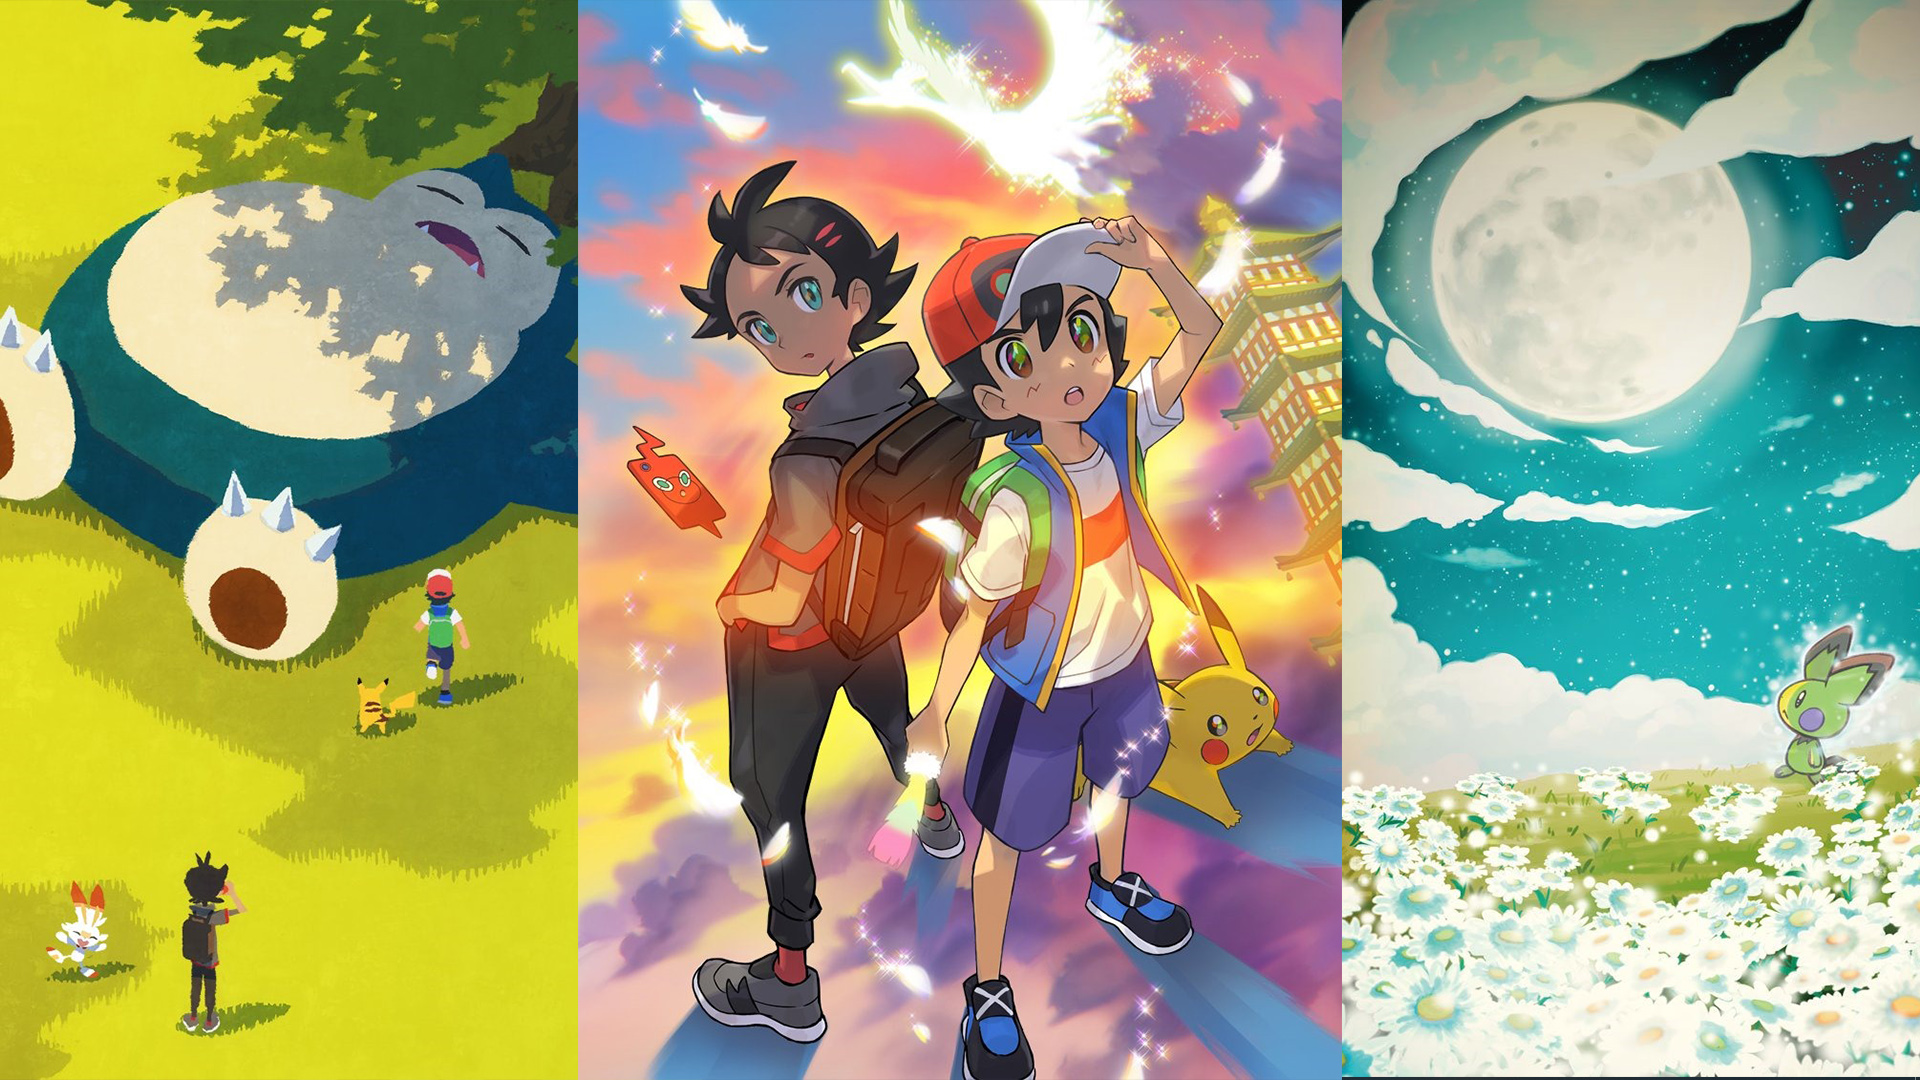 New Pokemon Anime Episodes Get Teased With Beautiful Artwork